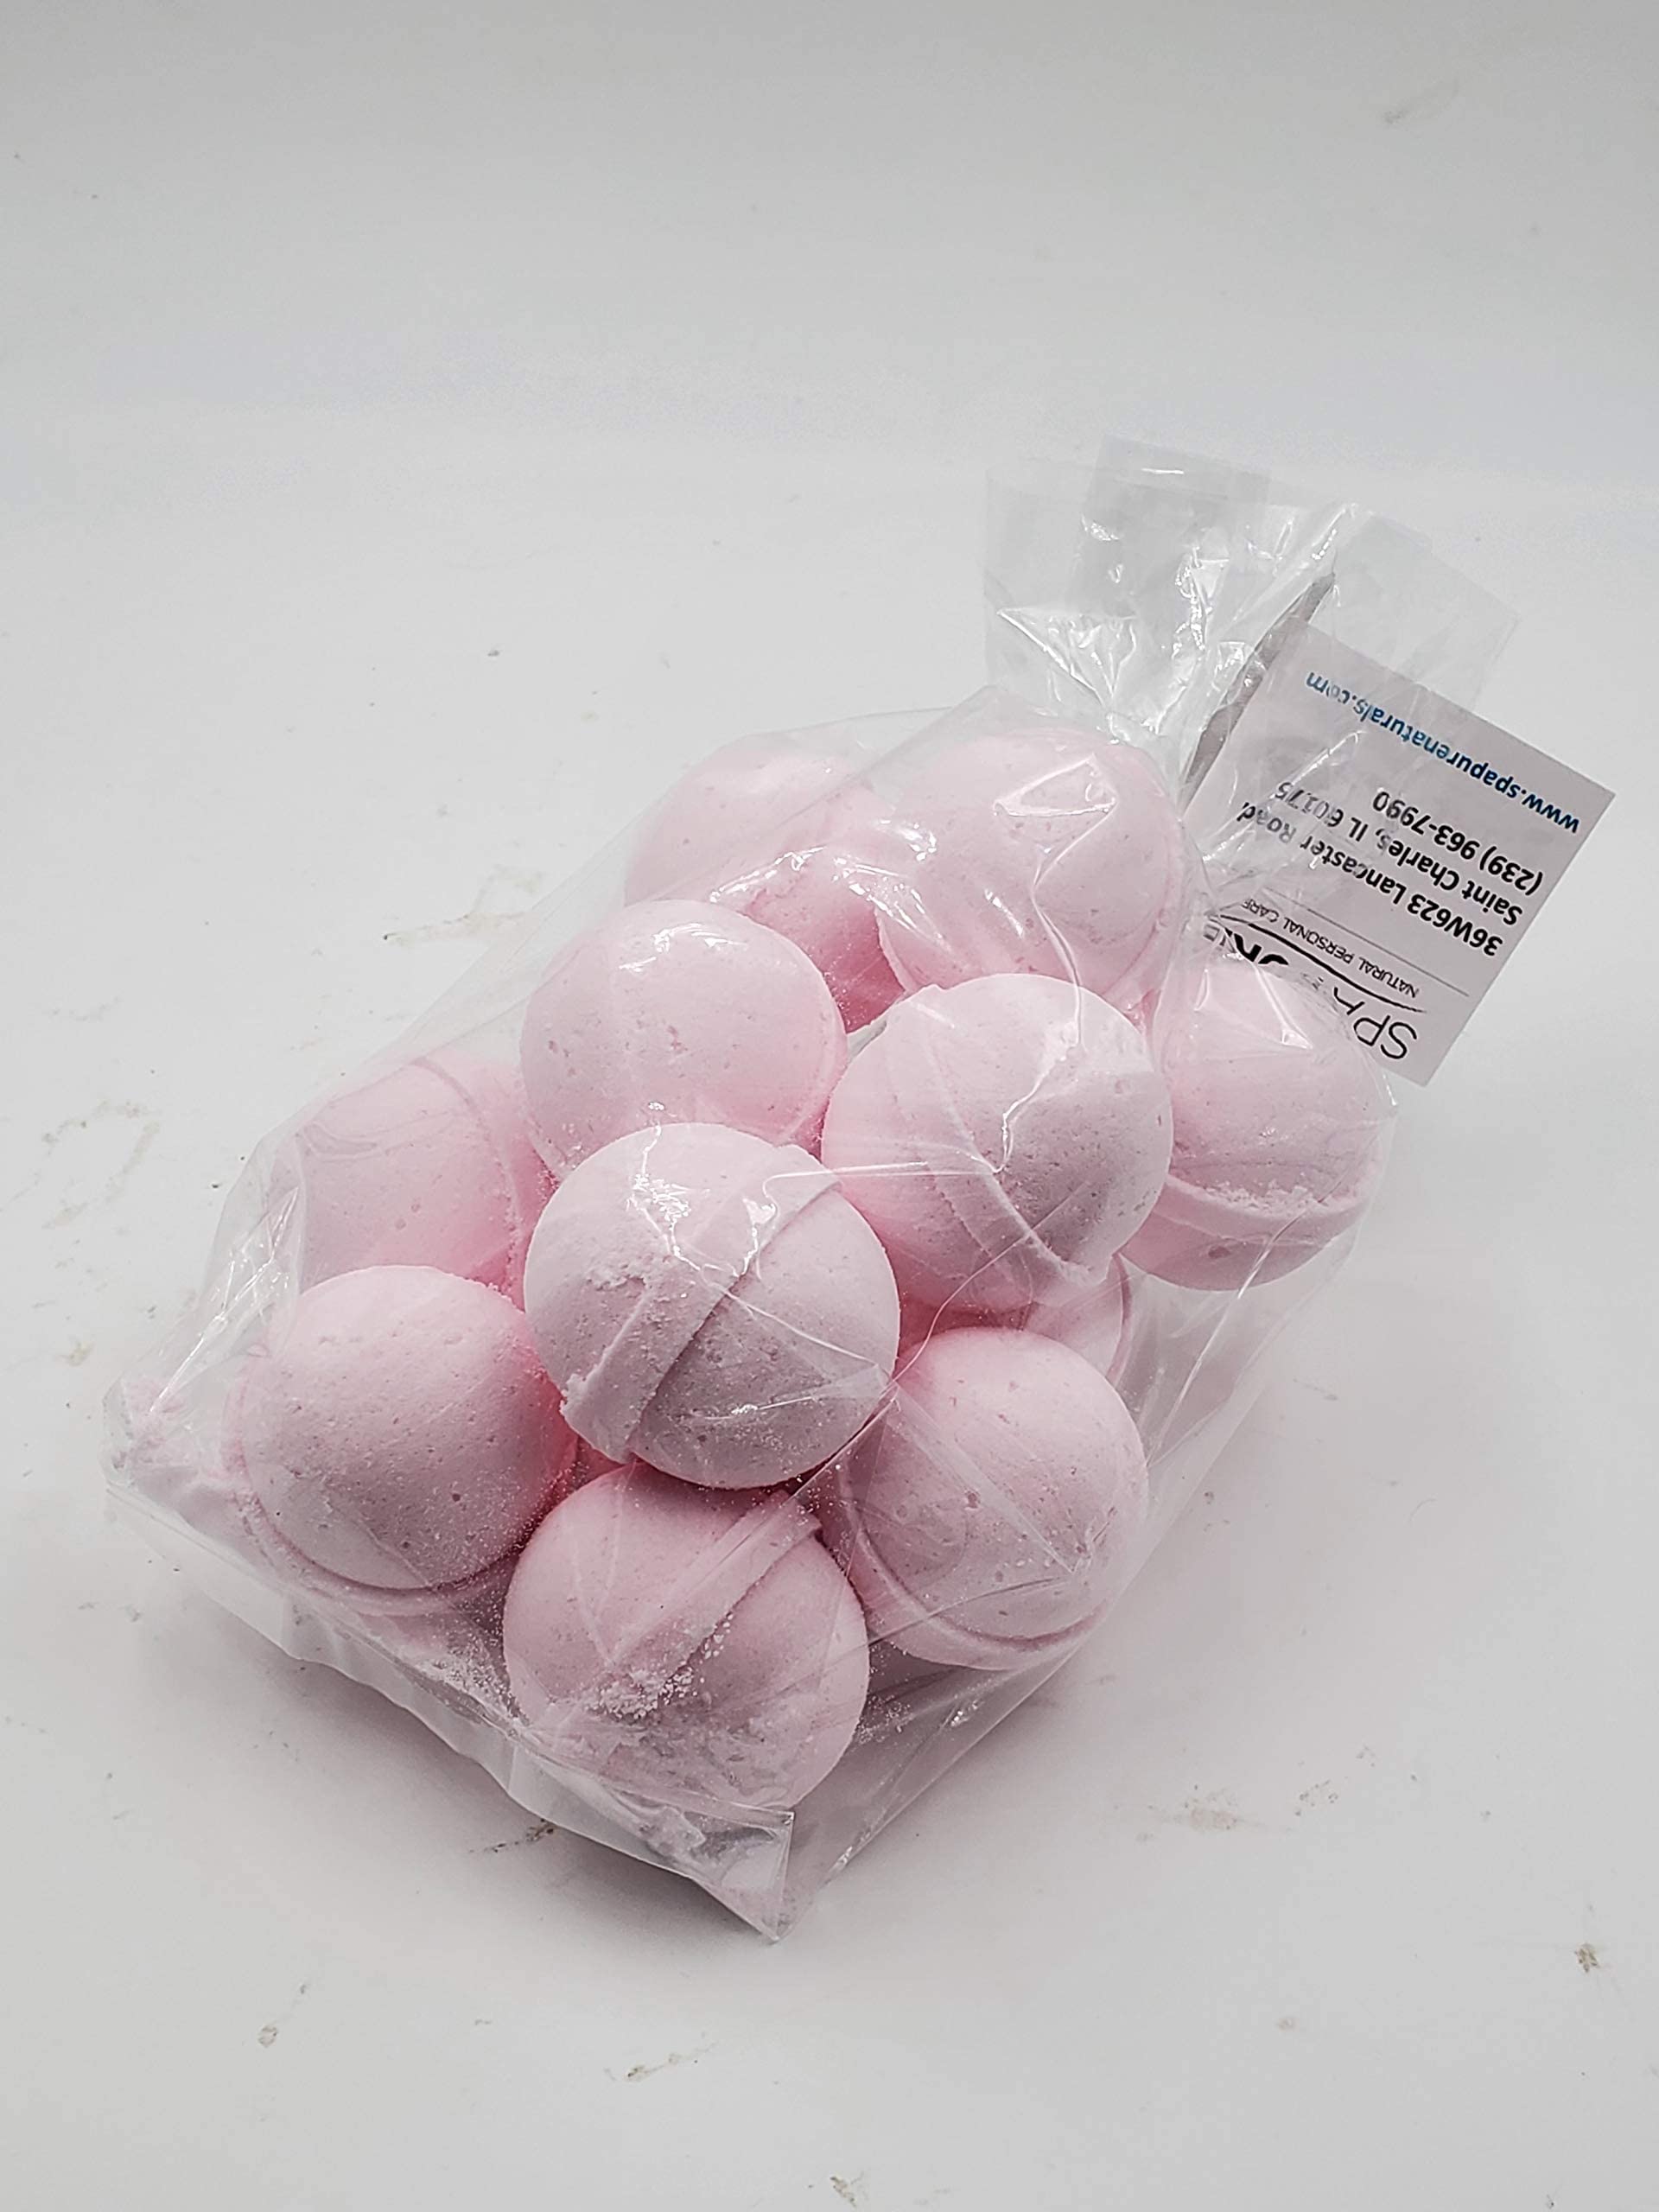 Spa Pure Cotton Candy Bath Bombs: Fizzies Made in USA with Shea Butter, Ultra Moisturizing, Great for Dry Skin, All Skin Types (14 Count) Pack of 1